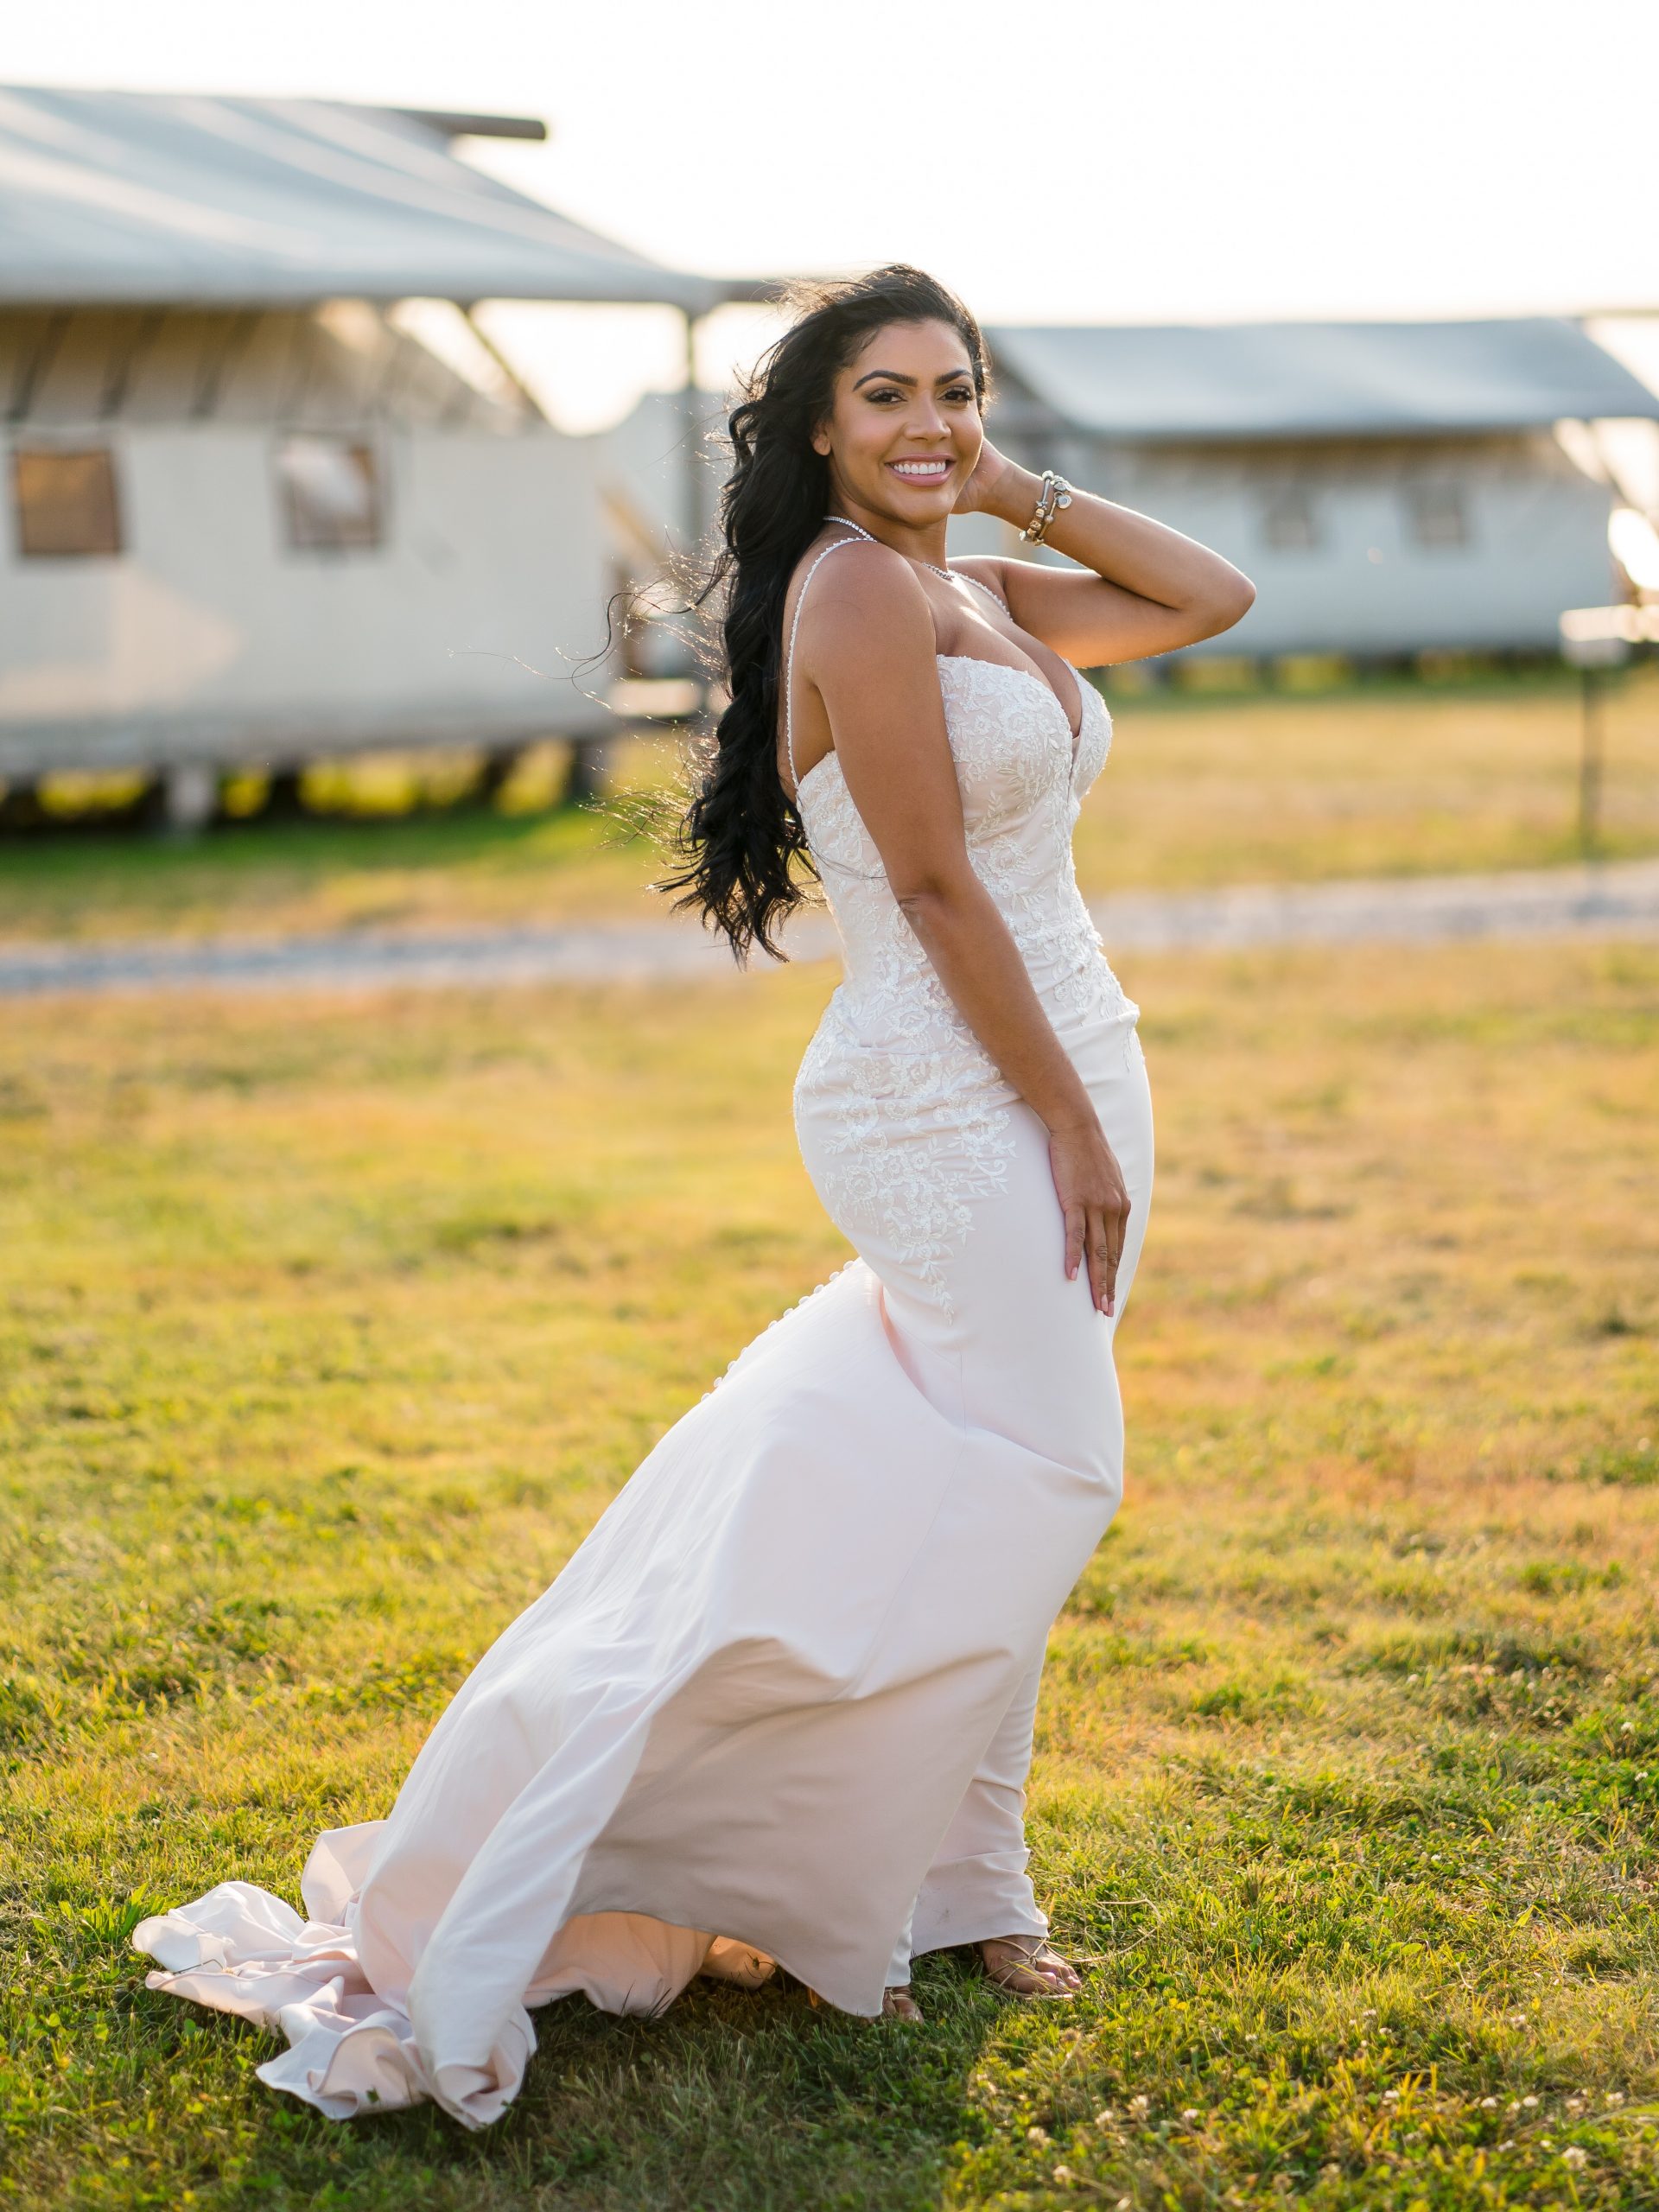 Influencer at Influencer Event Wearing Simple Crepe Wedding Dress Called Aubrey by Rebecca Ingram